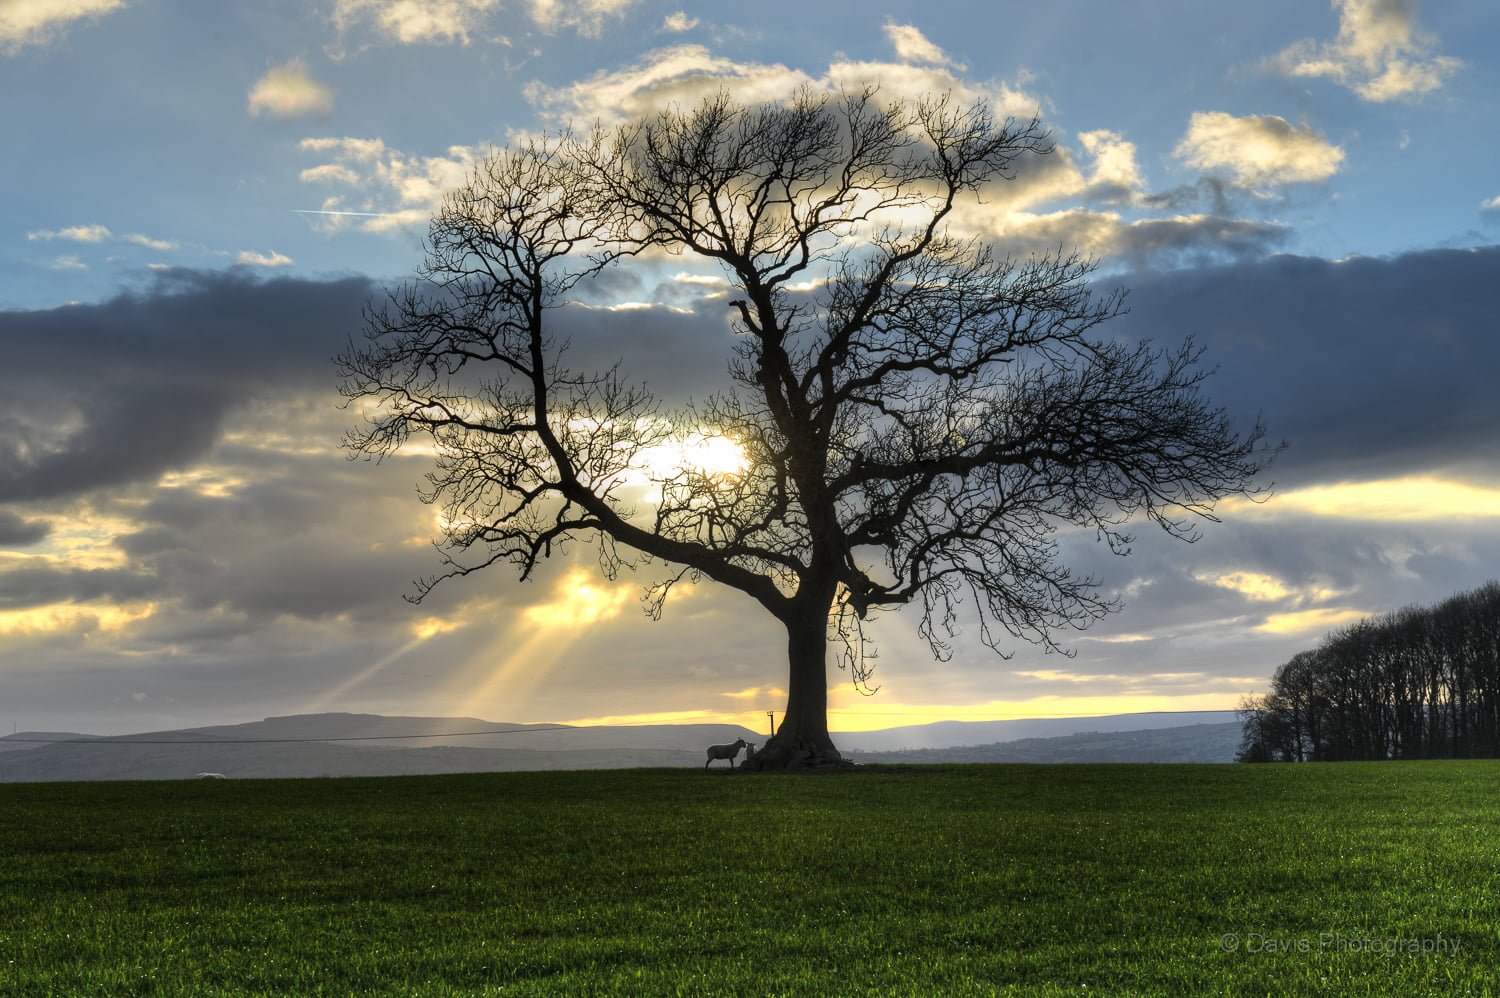 silhouette of tree with animal on green grass field with sun rays during daytime